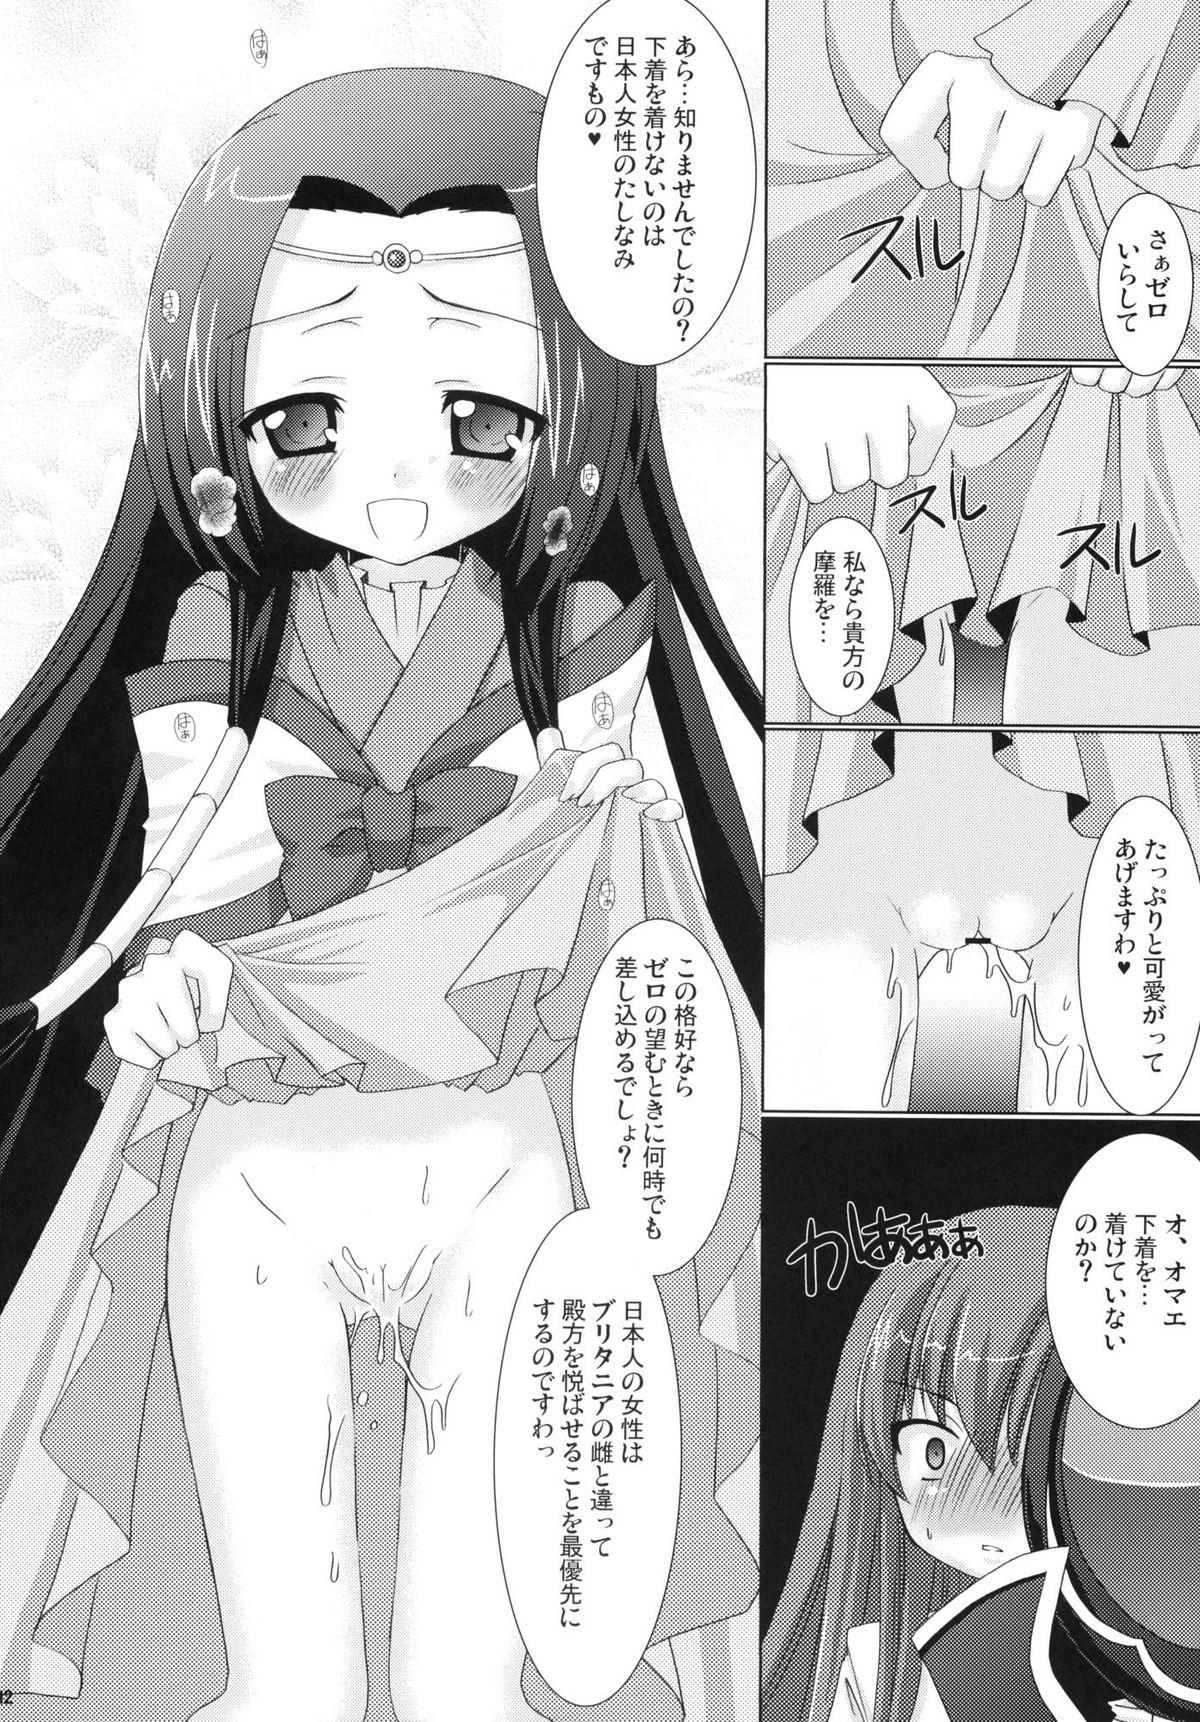 Sex Tape Kouhime Kyouhime - Code geass Cocks - Page 12